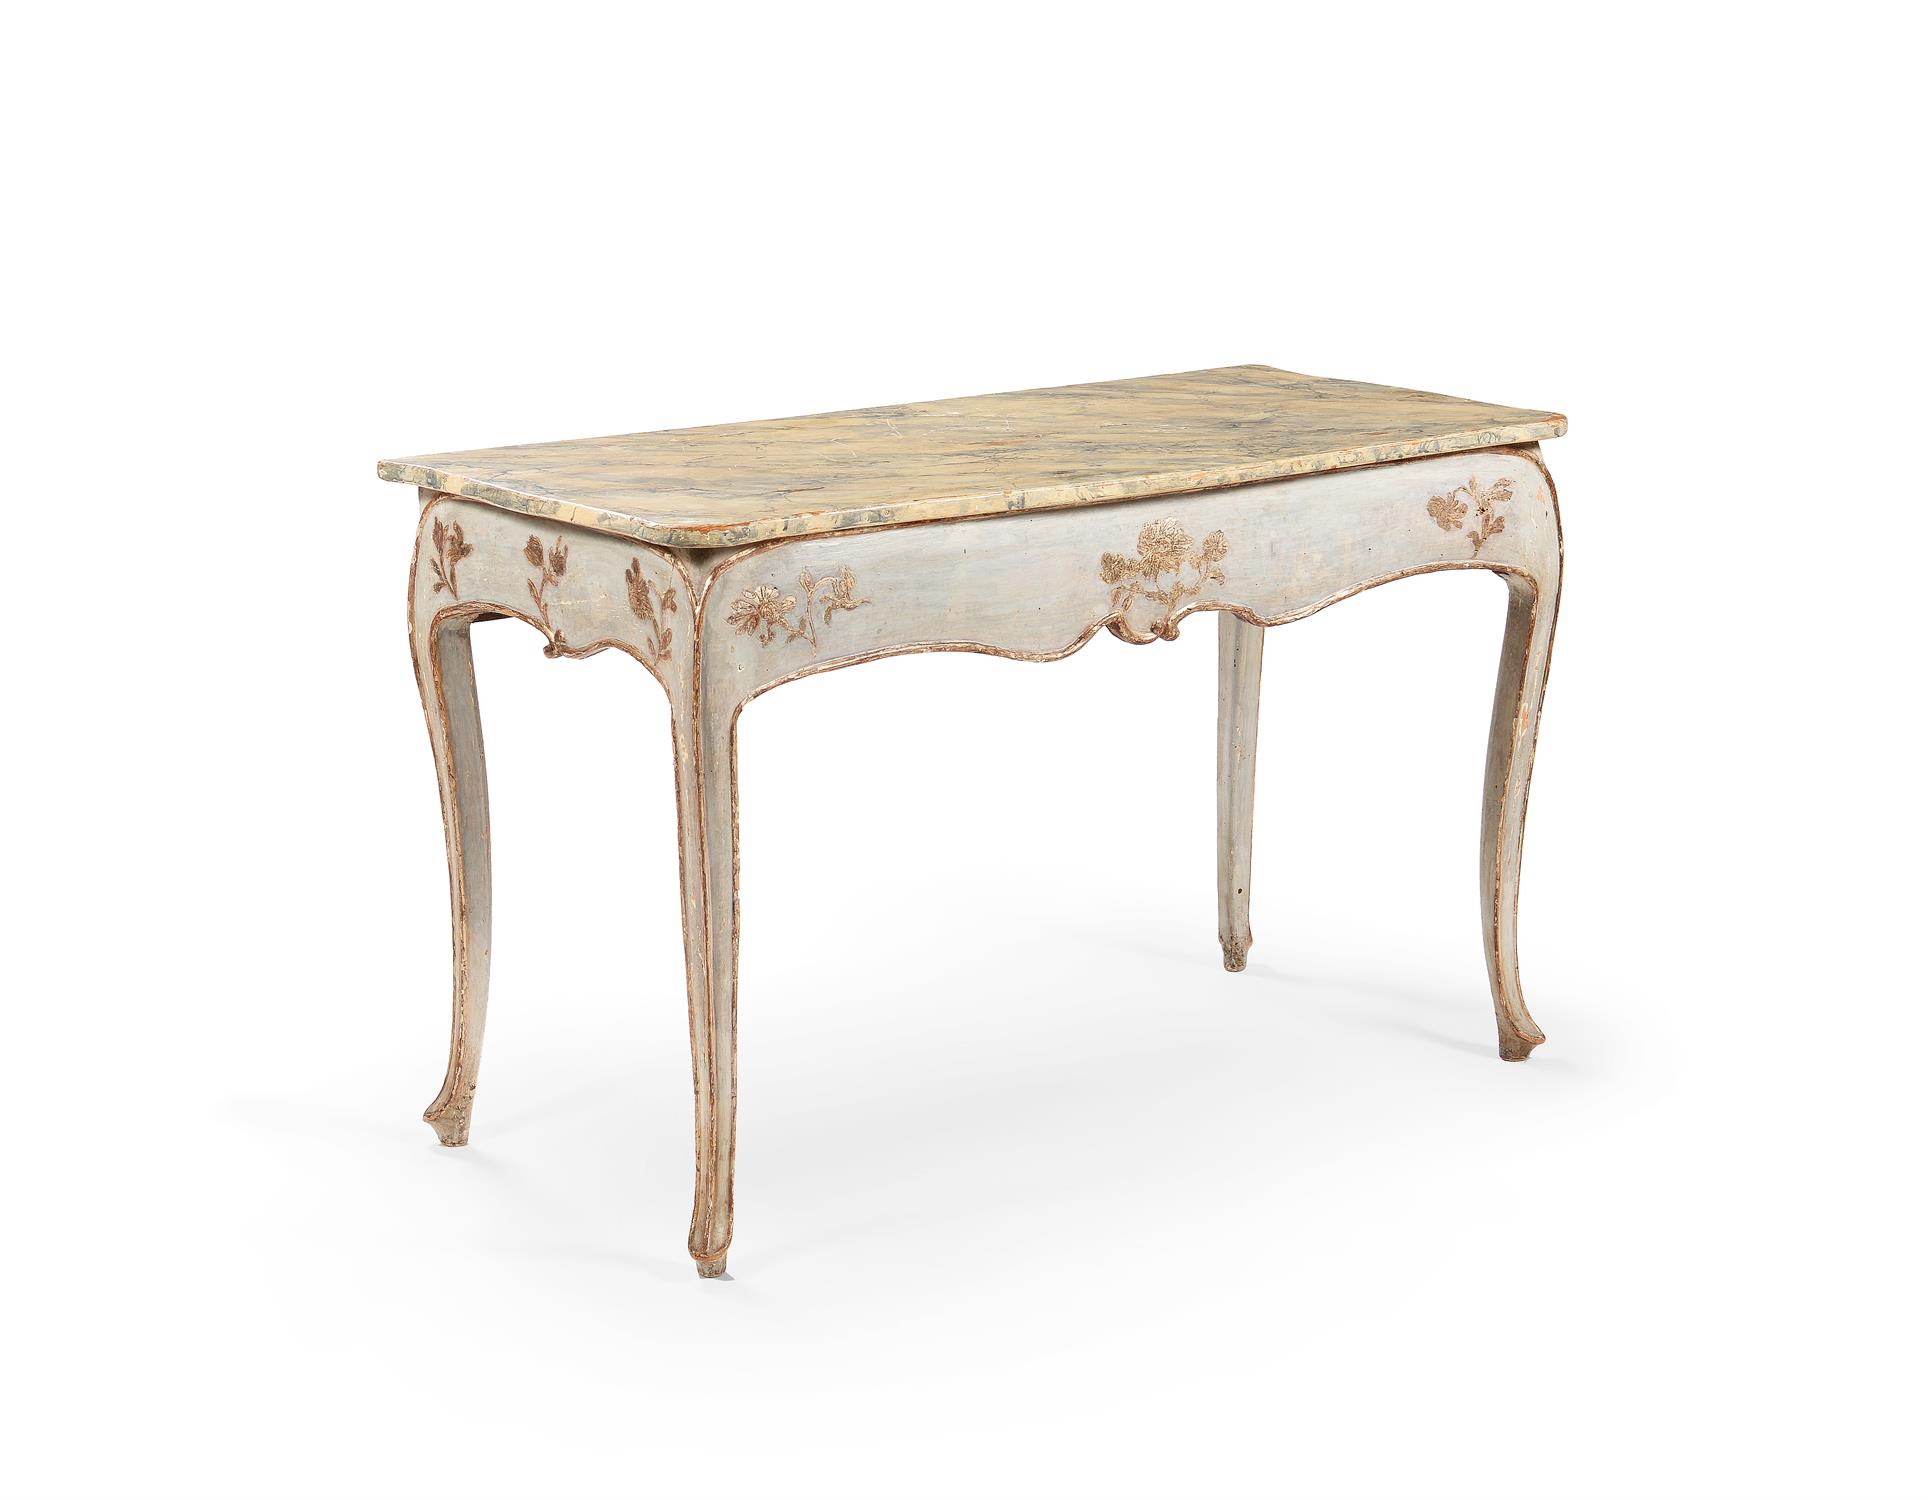 An Italian painted and silvered side or console table, circa 1770